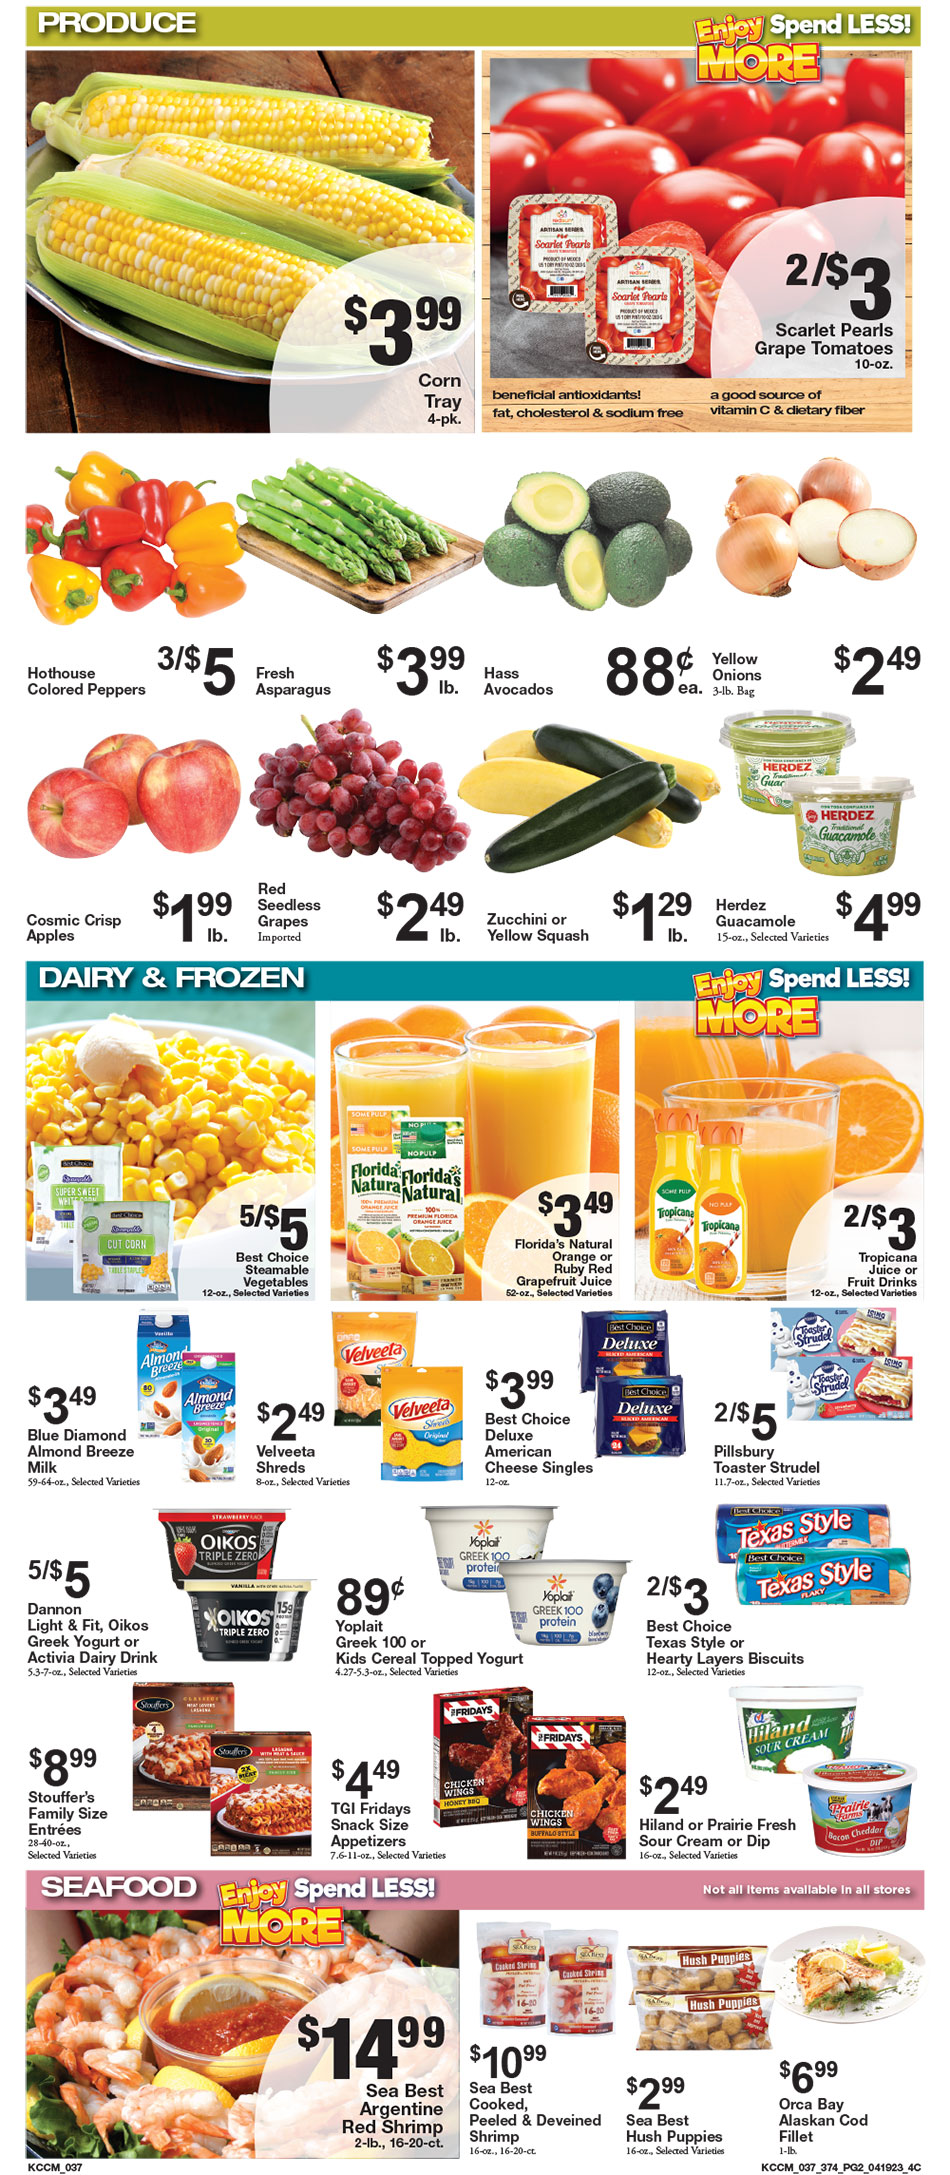 Seabrook Apple Market - Weekly Specials - Page 1 04/20/2022